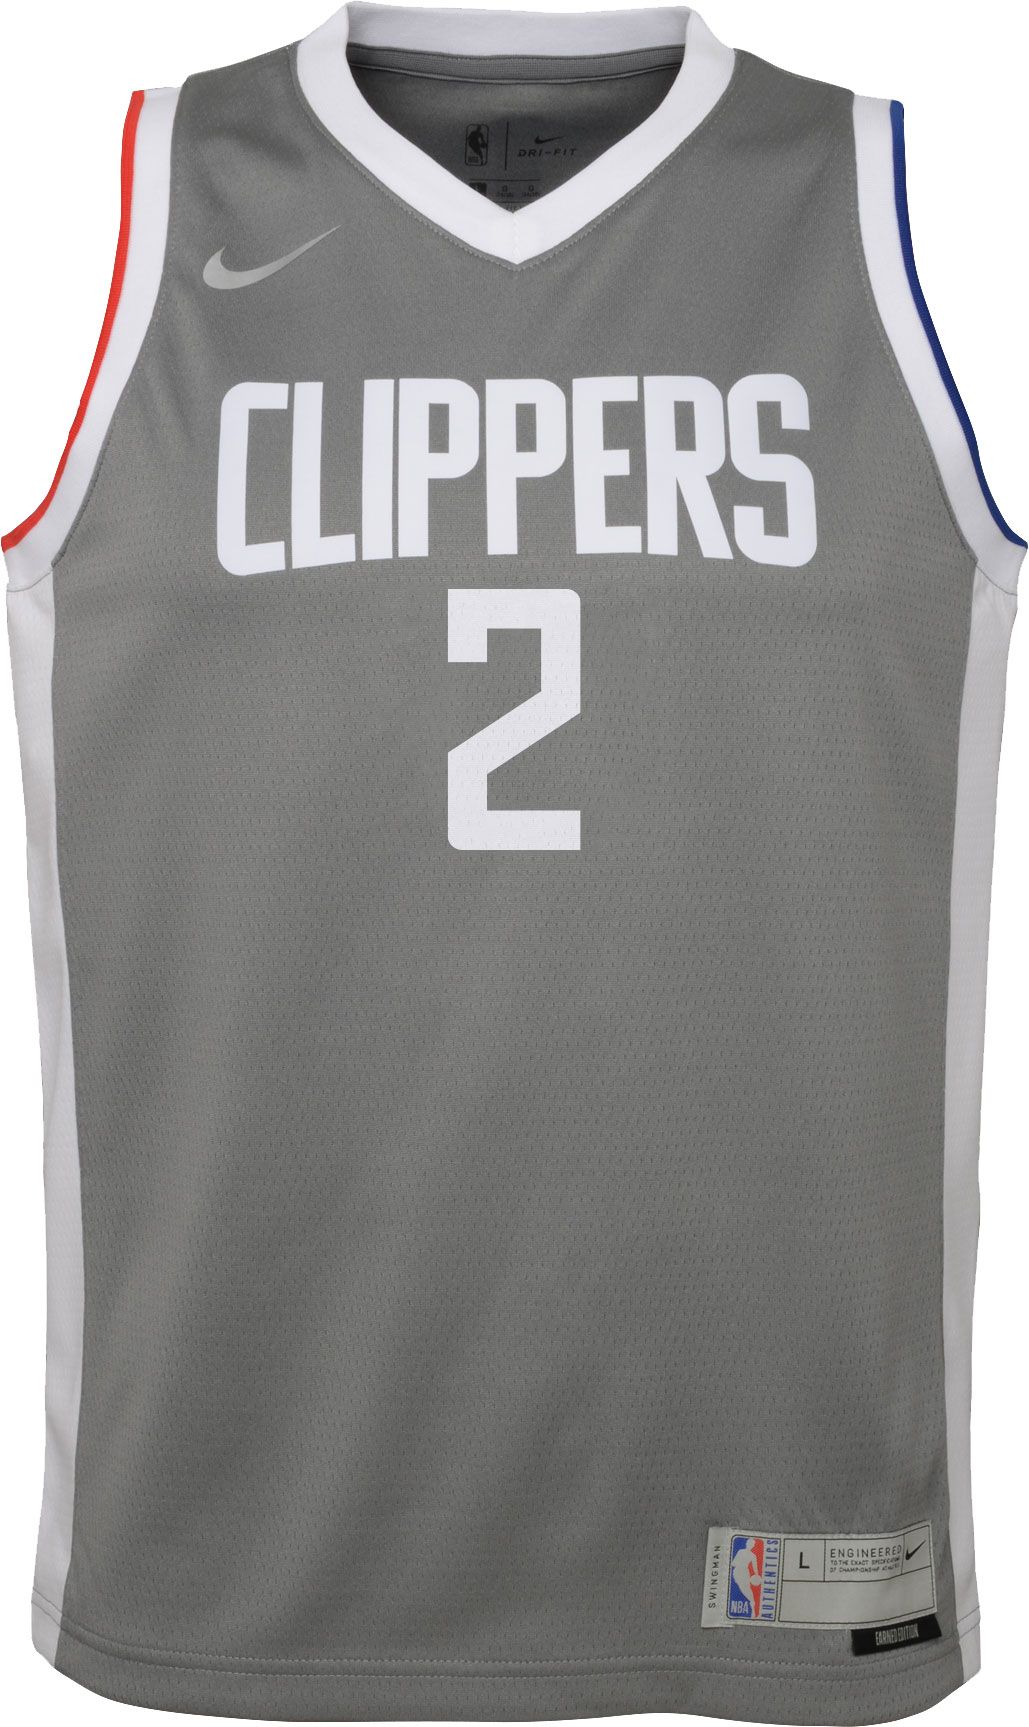 clippers grey jersey